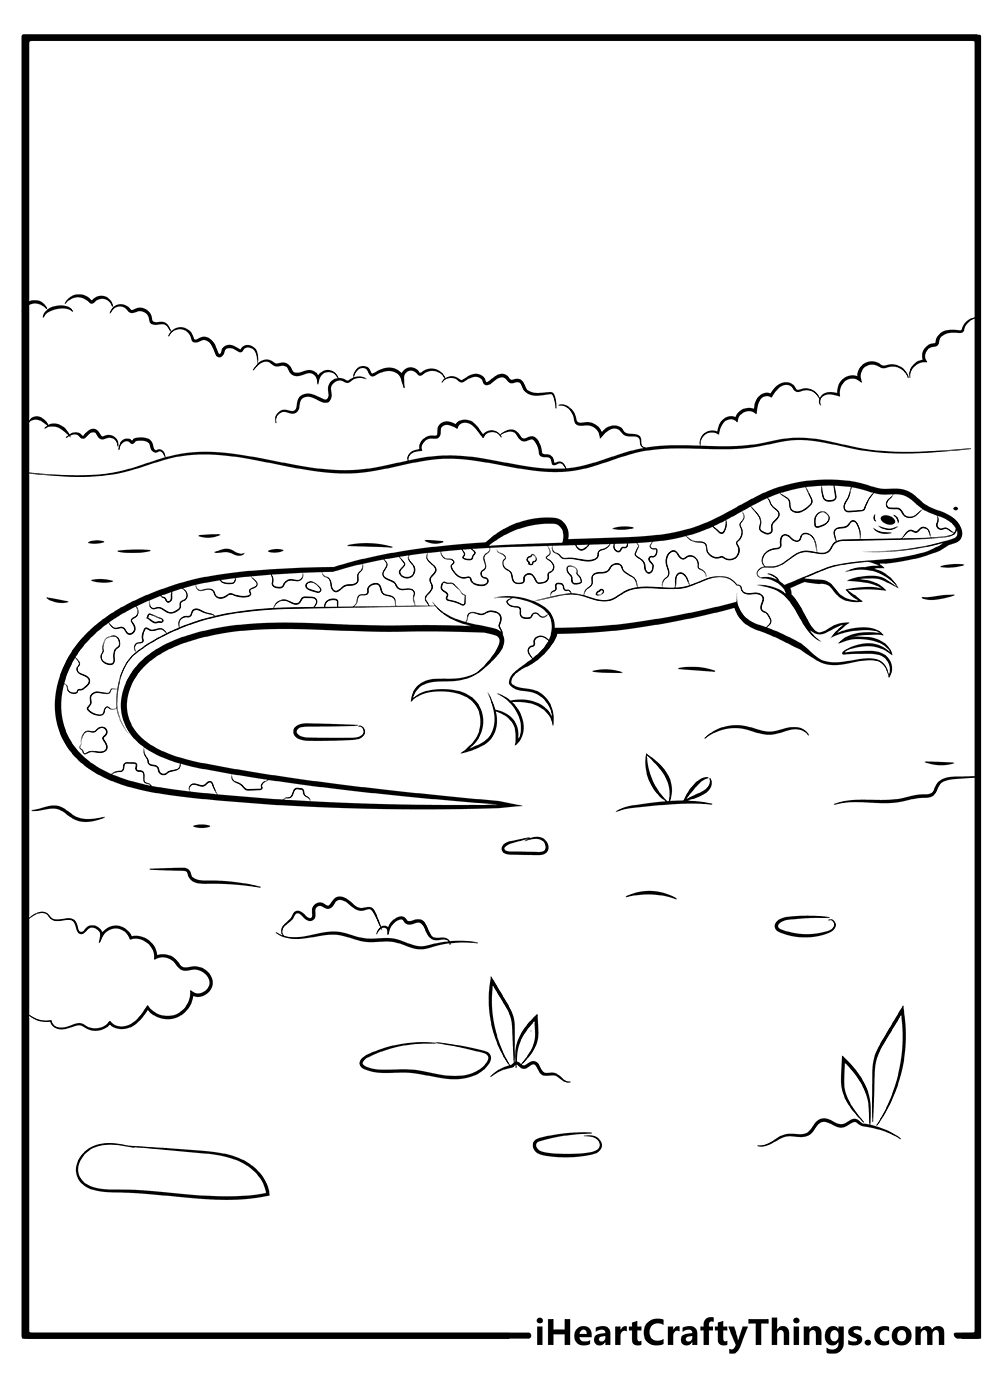 Lizard Coloring Pages free print out